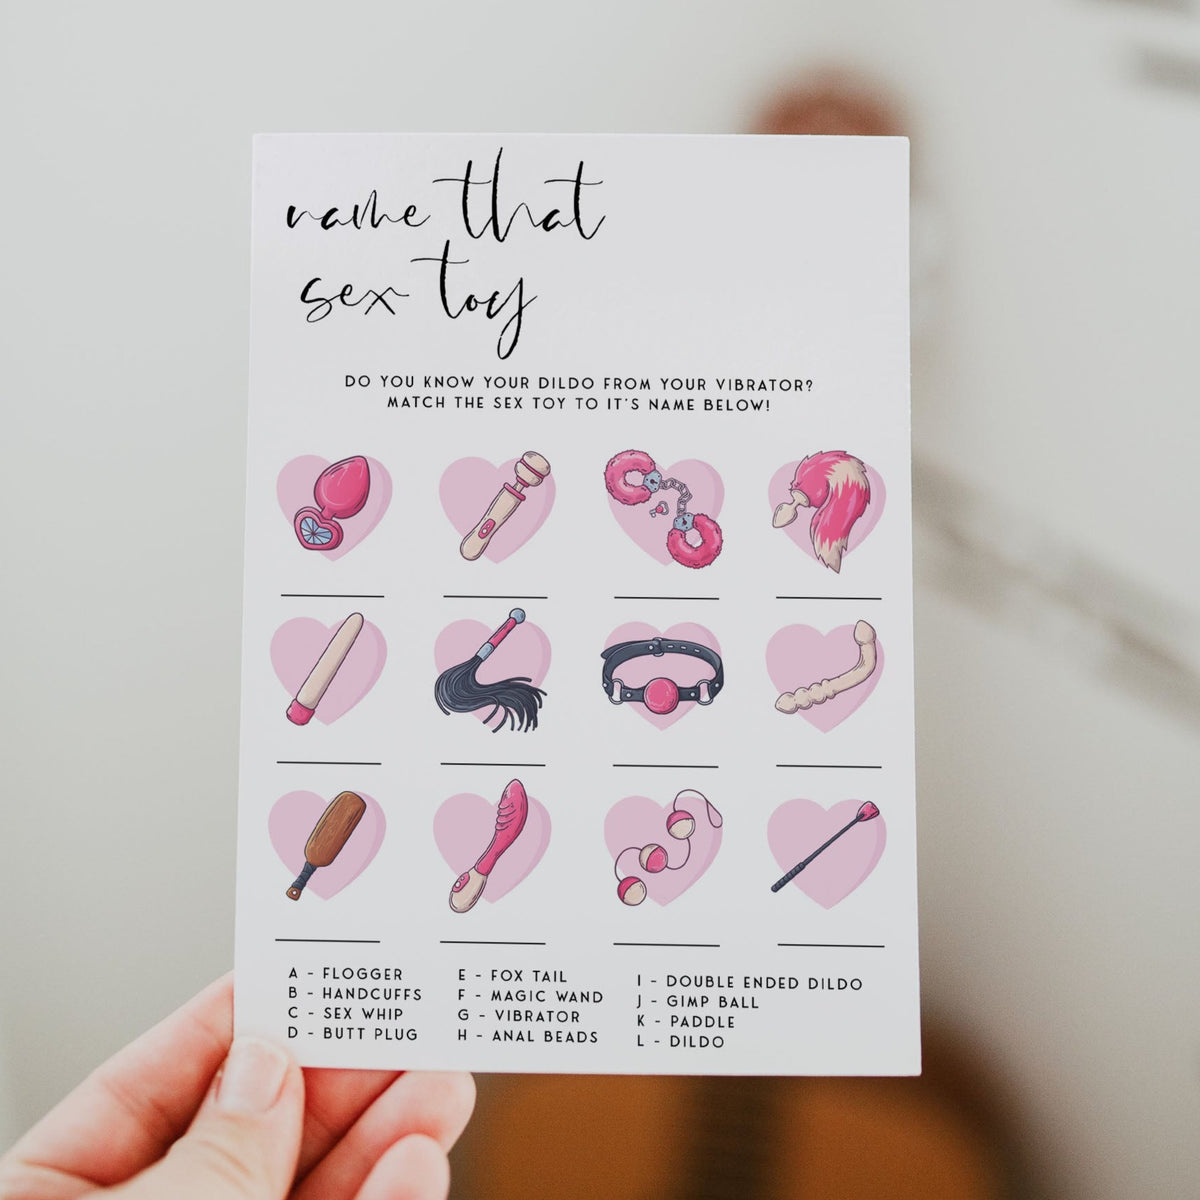 Fully editable and printable bridal shower guess the sex toy game with a modern minimalist design. Perfect for a modern simple bridal shower themed party